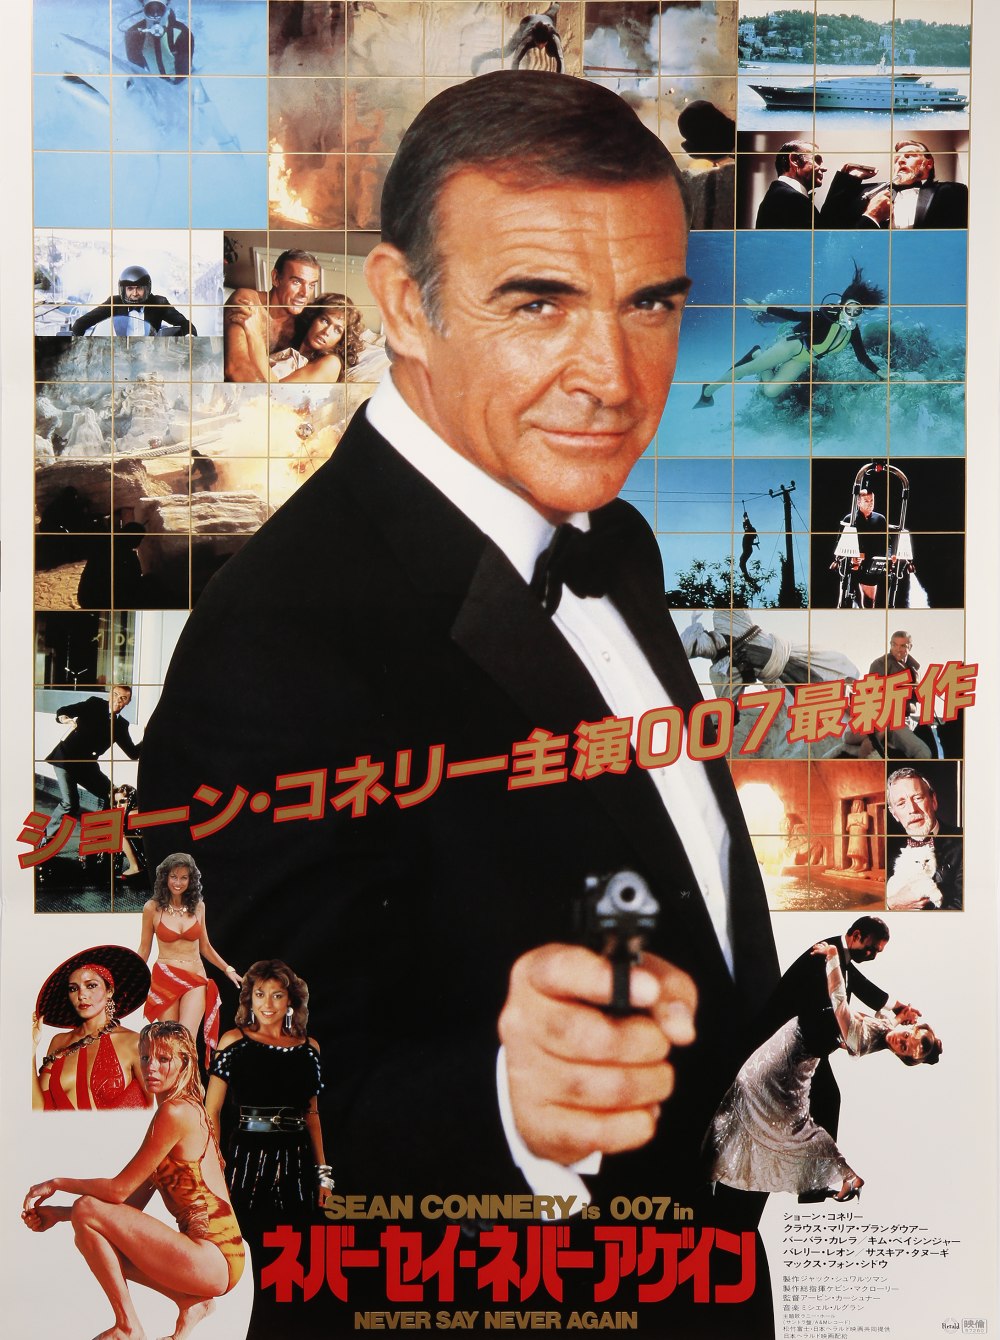 TWO JAPANESE JAMES BOND 007 POSTERS SHOWA ERA, 1972 AND 1983 Both featuring Sean Connery, the